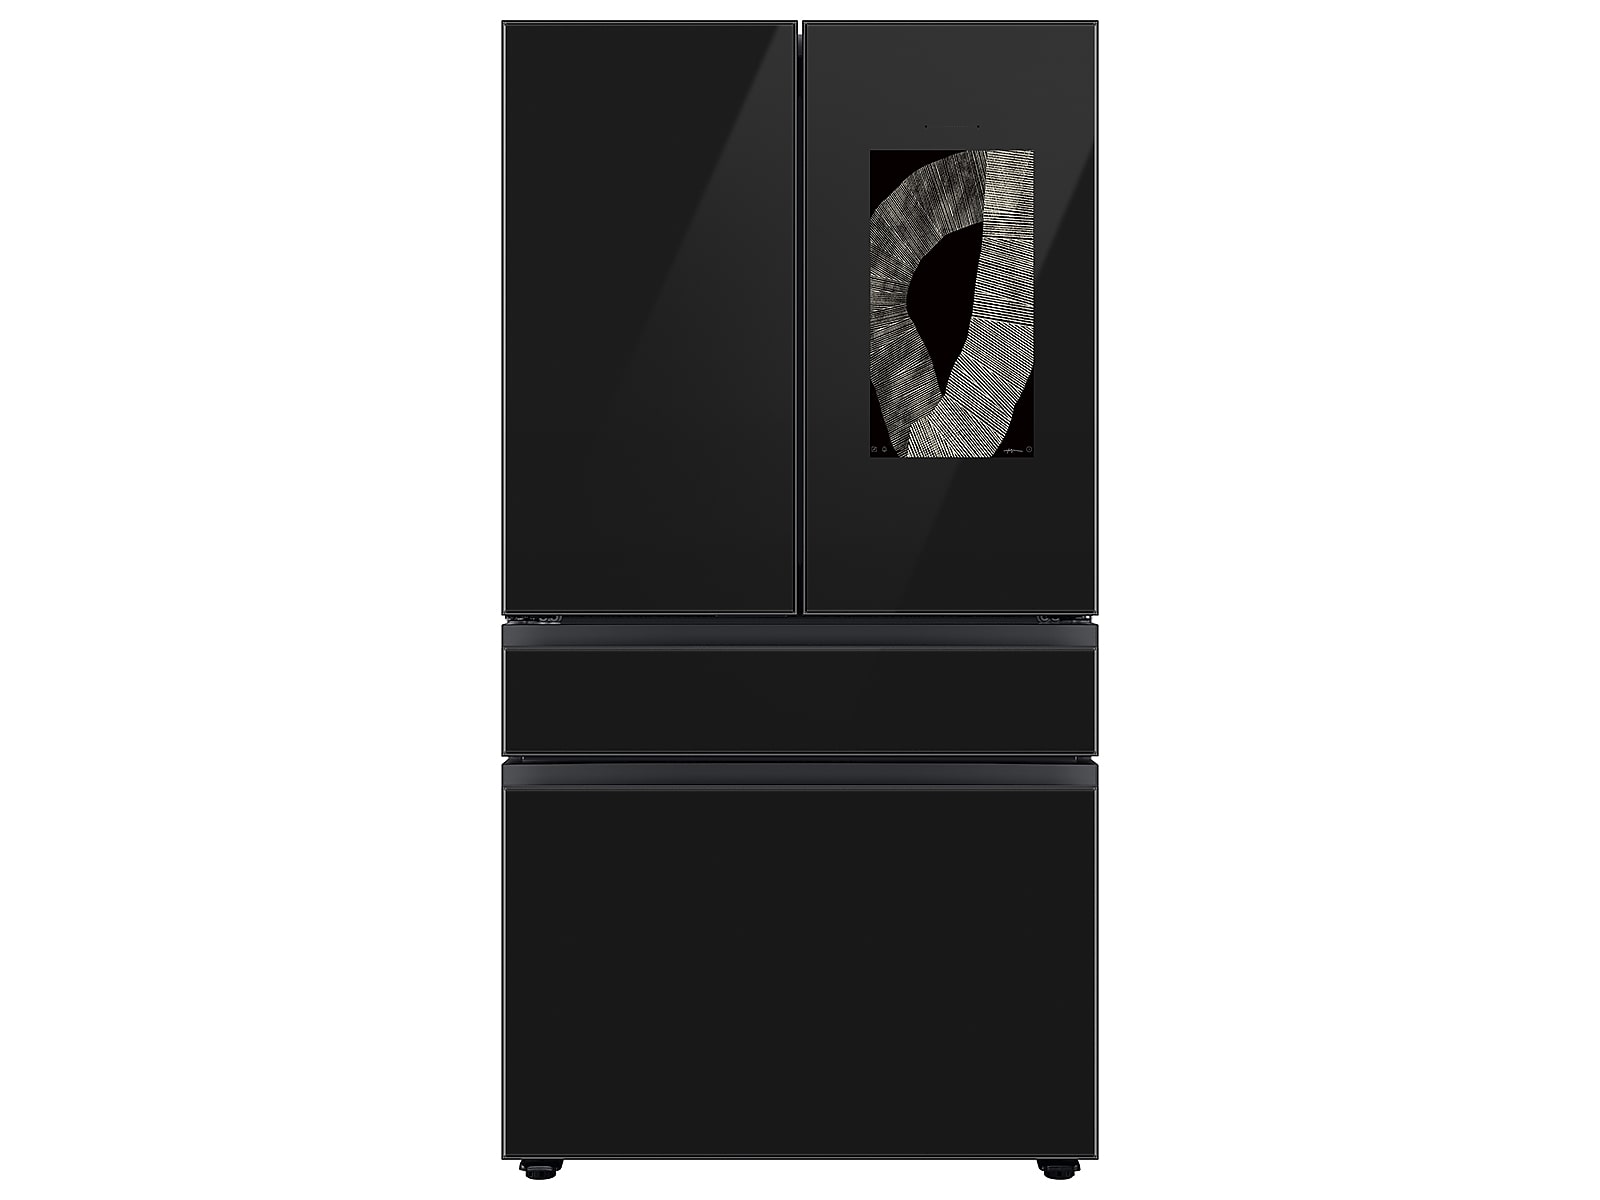 Samsung Bespoke 4-Door French Door Refrigerator (29 cu. ft.) - with Family Hub™ Panel in Charcoal Glass - (with Customizable Door Panel Colors) in Charcoal Glass photo